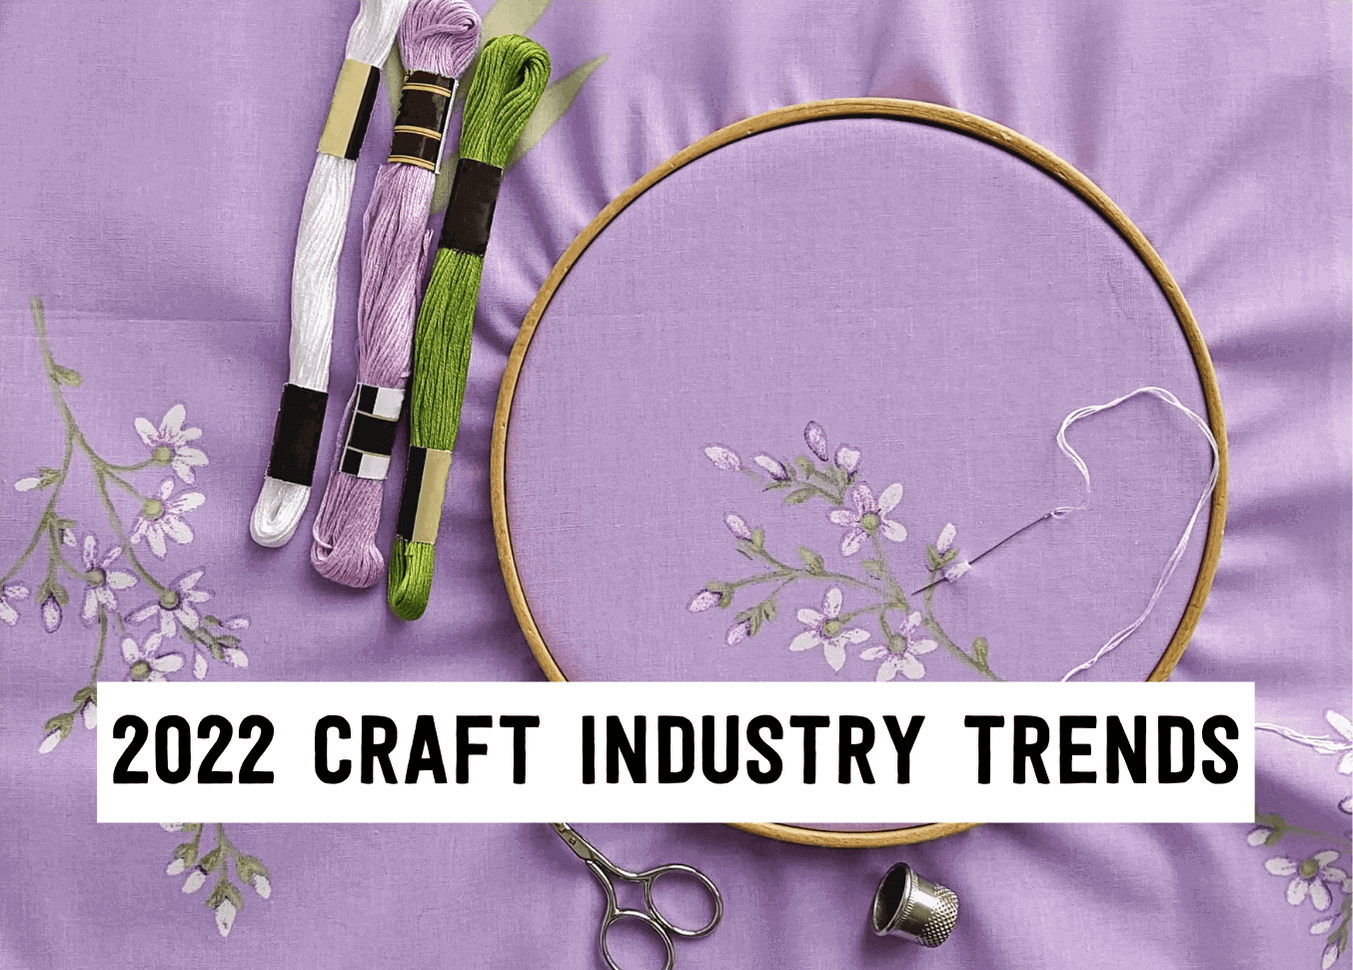 2022 craft industry trends | Tizzit.co - start and grow a successful handmade business